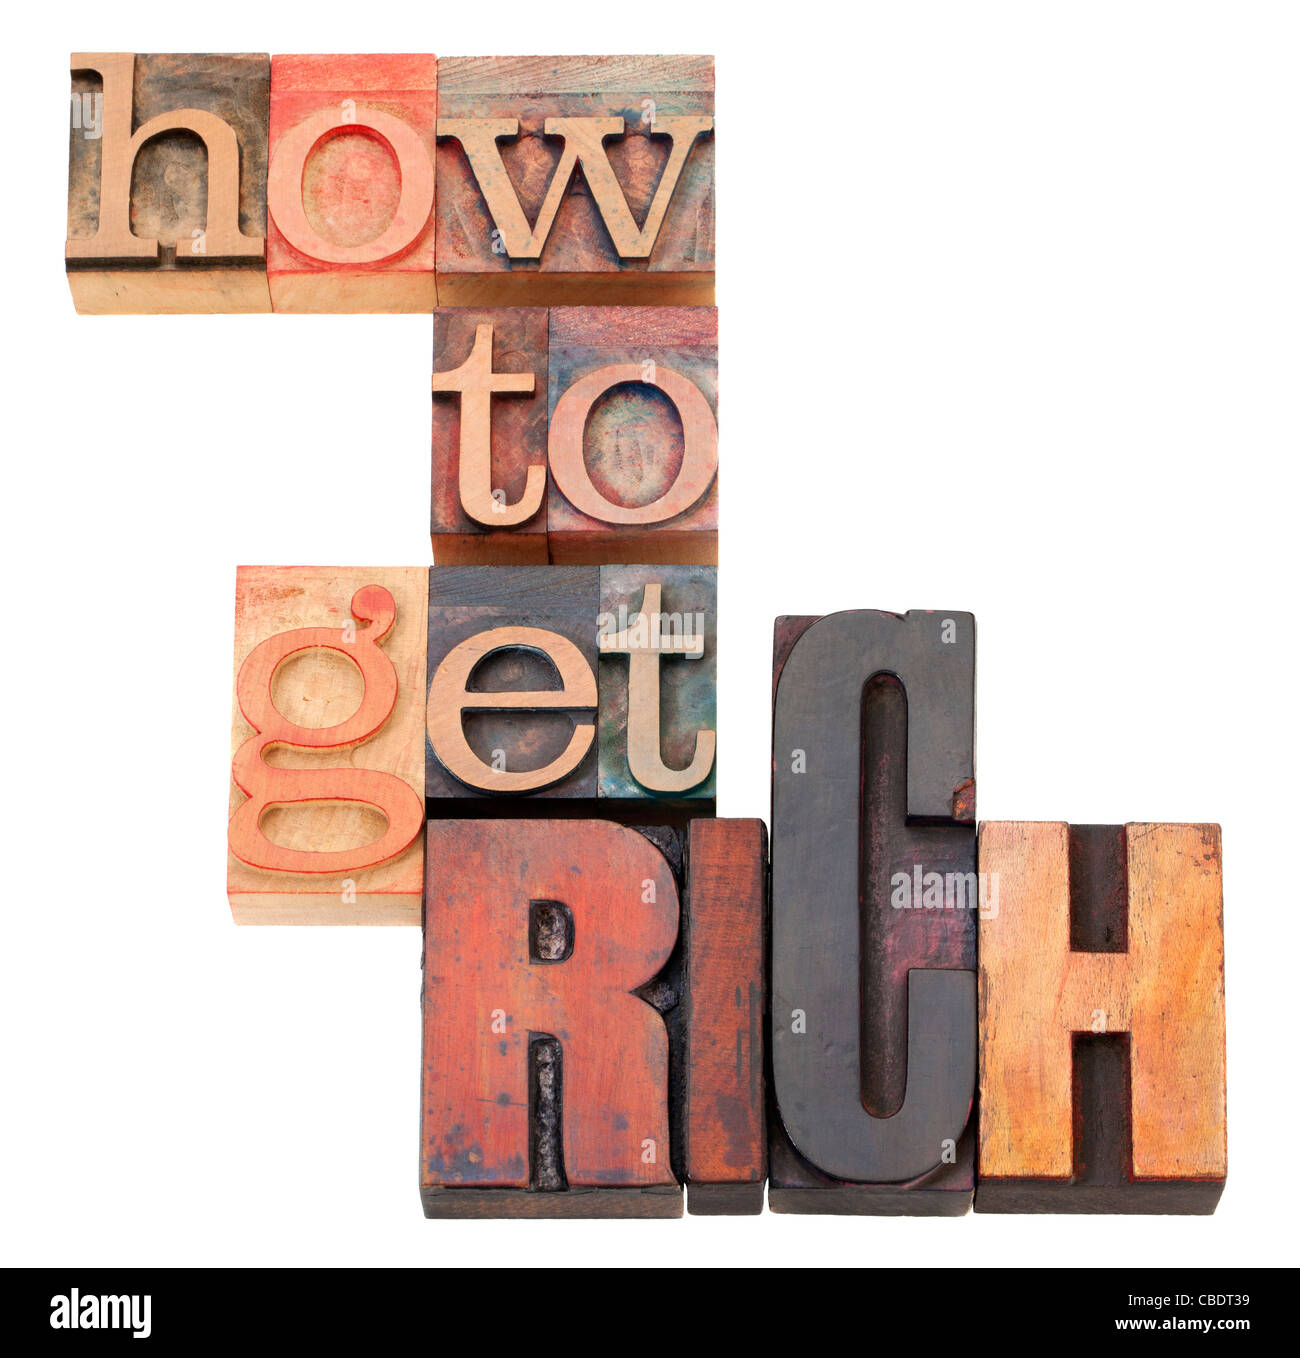 How to get rich - isolated phrase in vintage wood letterpress printing blocks Stock Photo